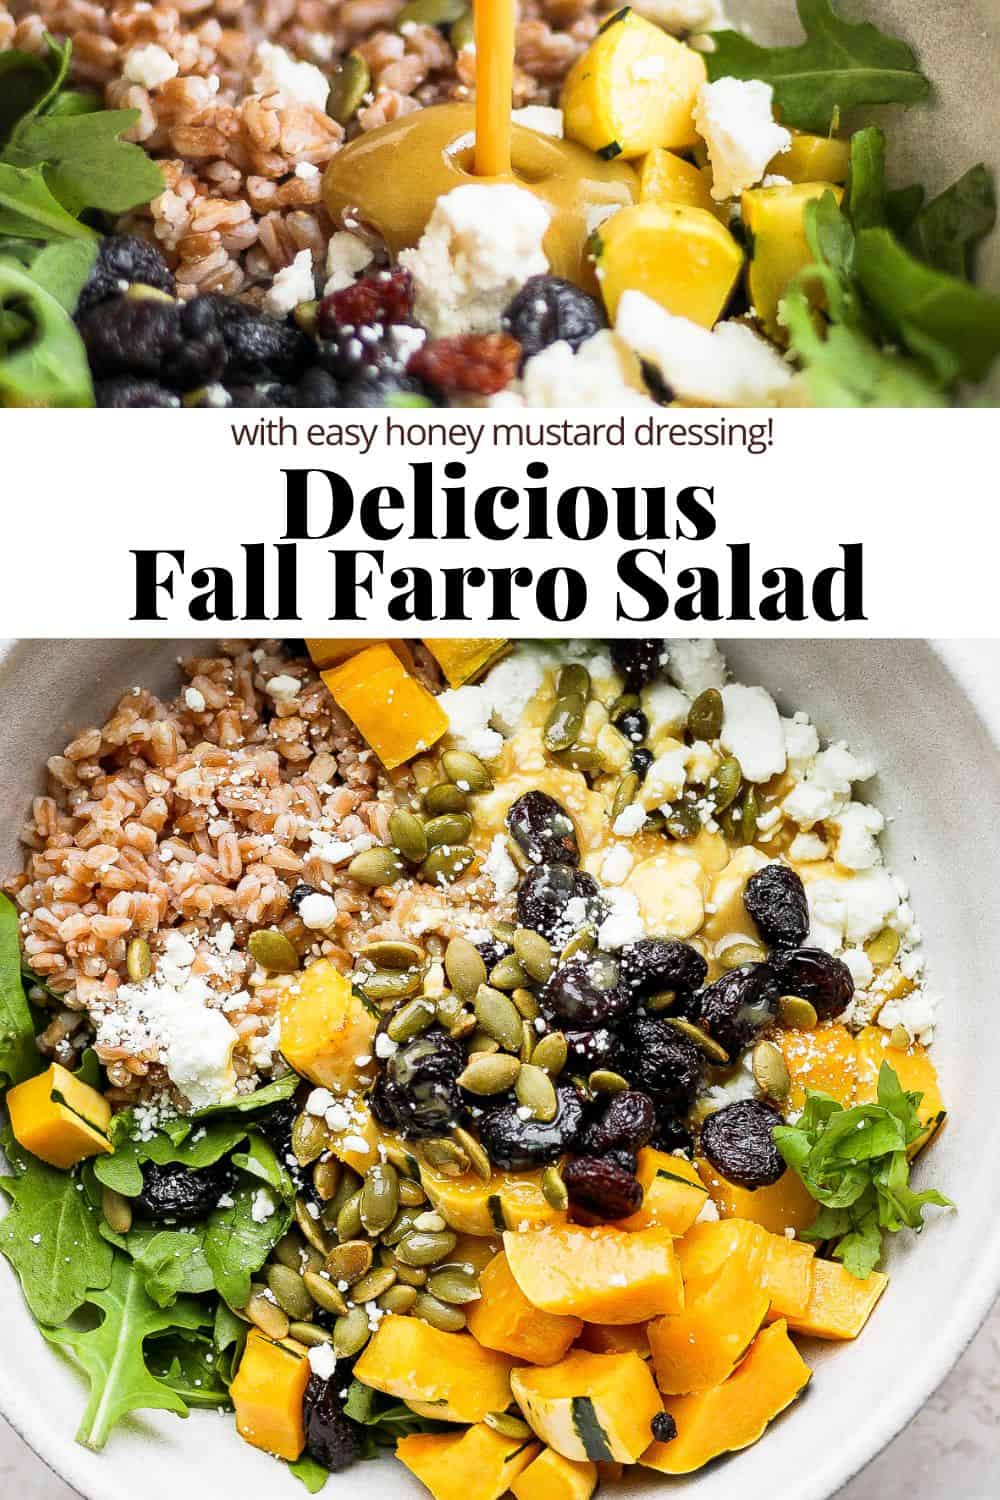 Pinterest image for a delicious fall farro salad.